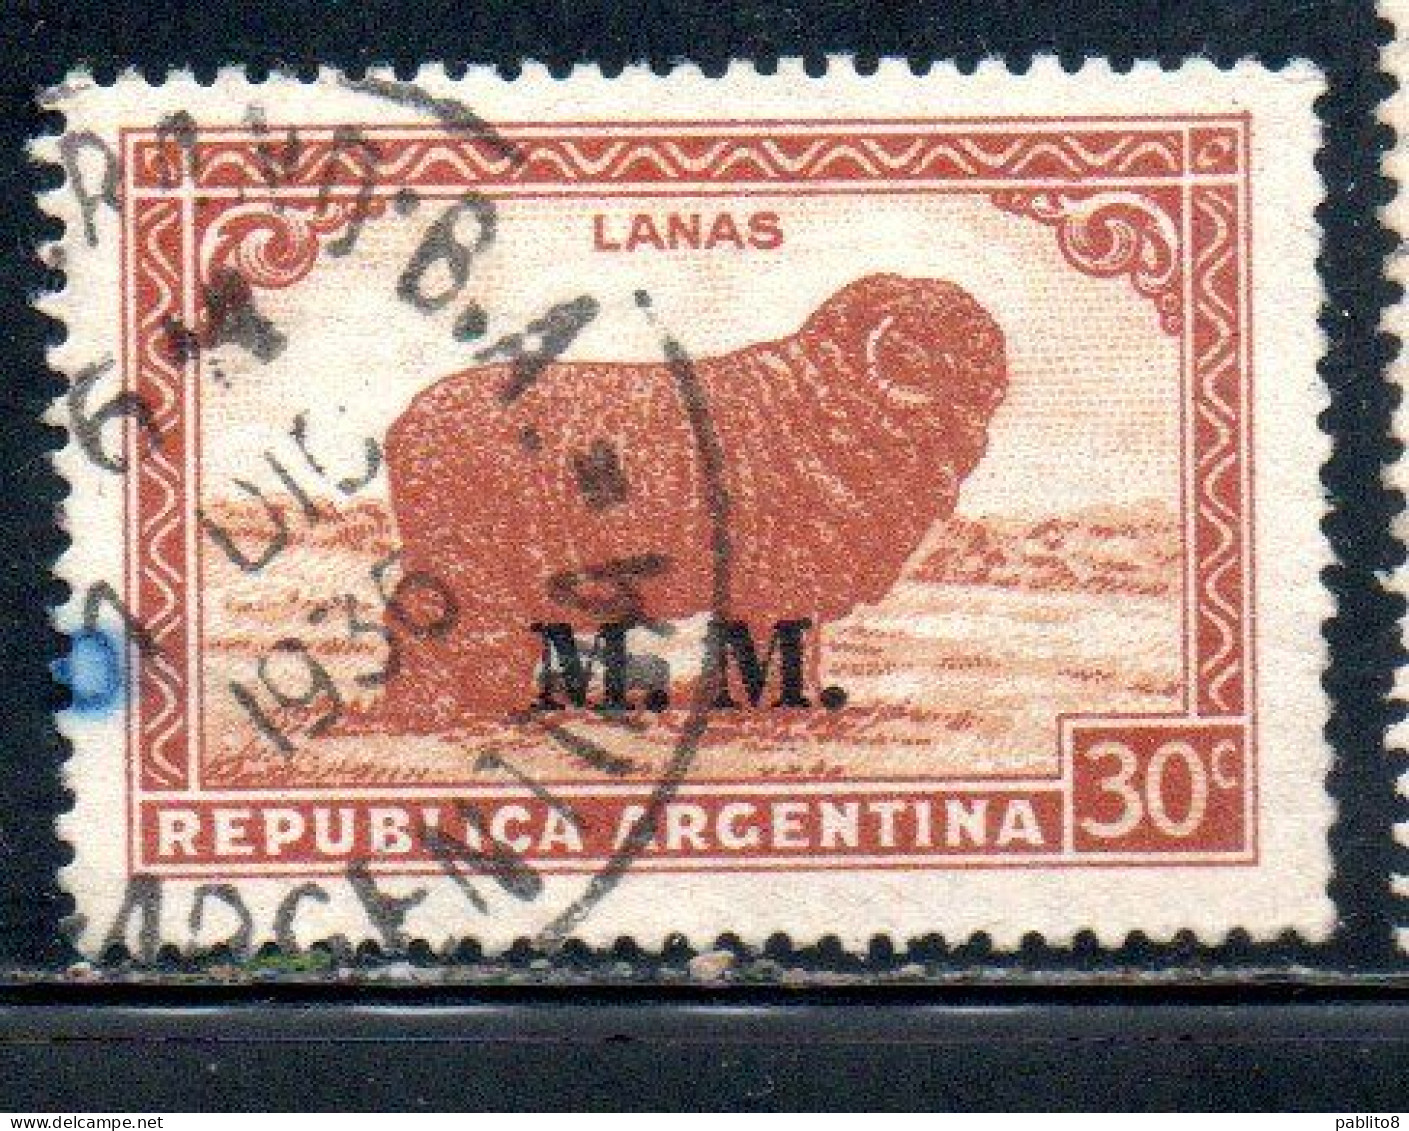 ARGENTINA 1935 1937 OFFICIAL DEPARTMENT STAMP OVERPRINTED M.M. MINISTRY OF MARINE MM 30c USED USADO - Officials